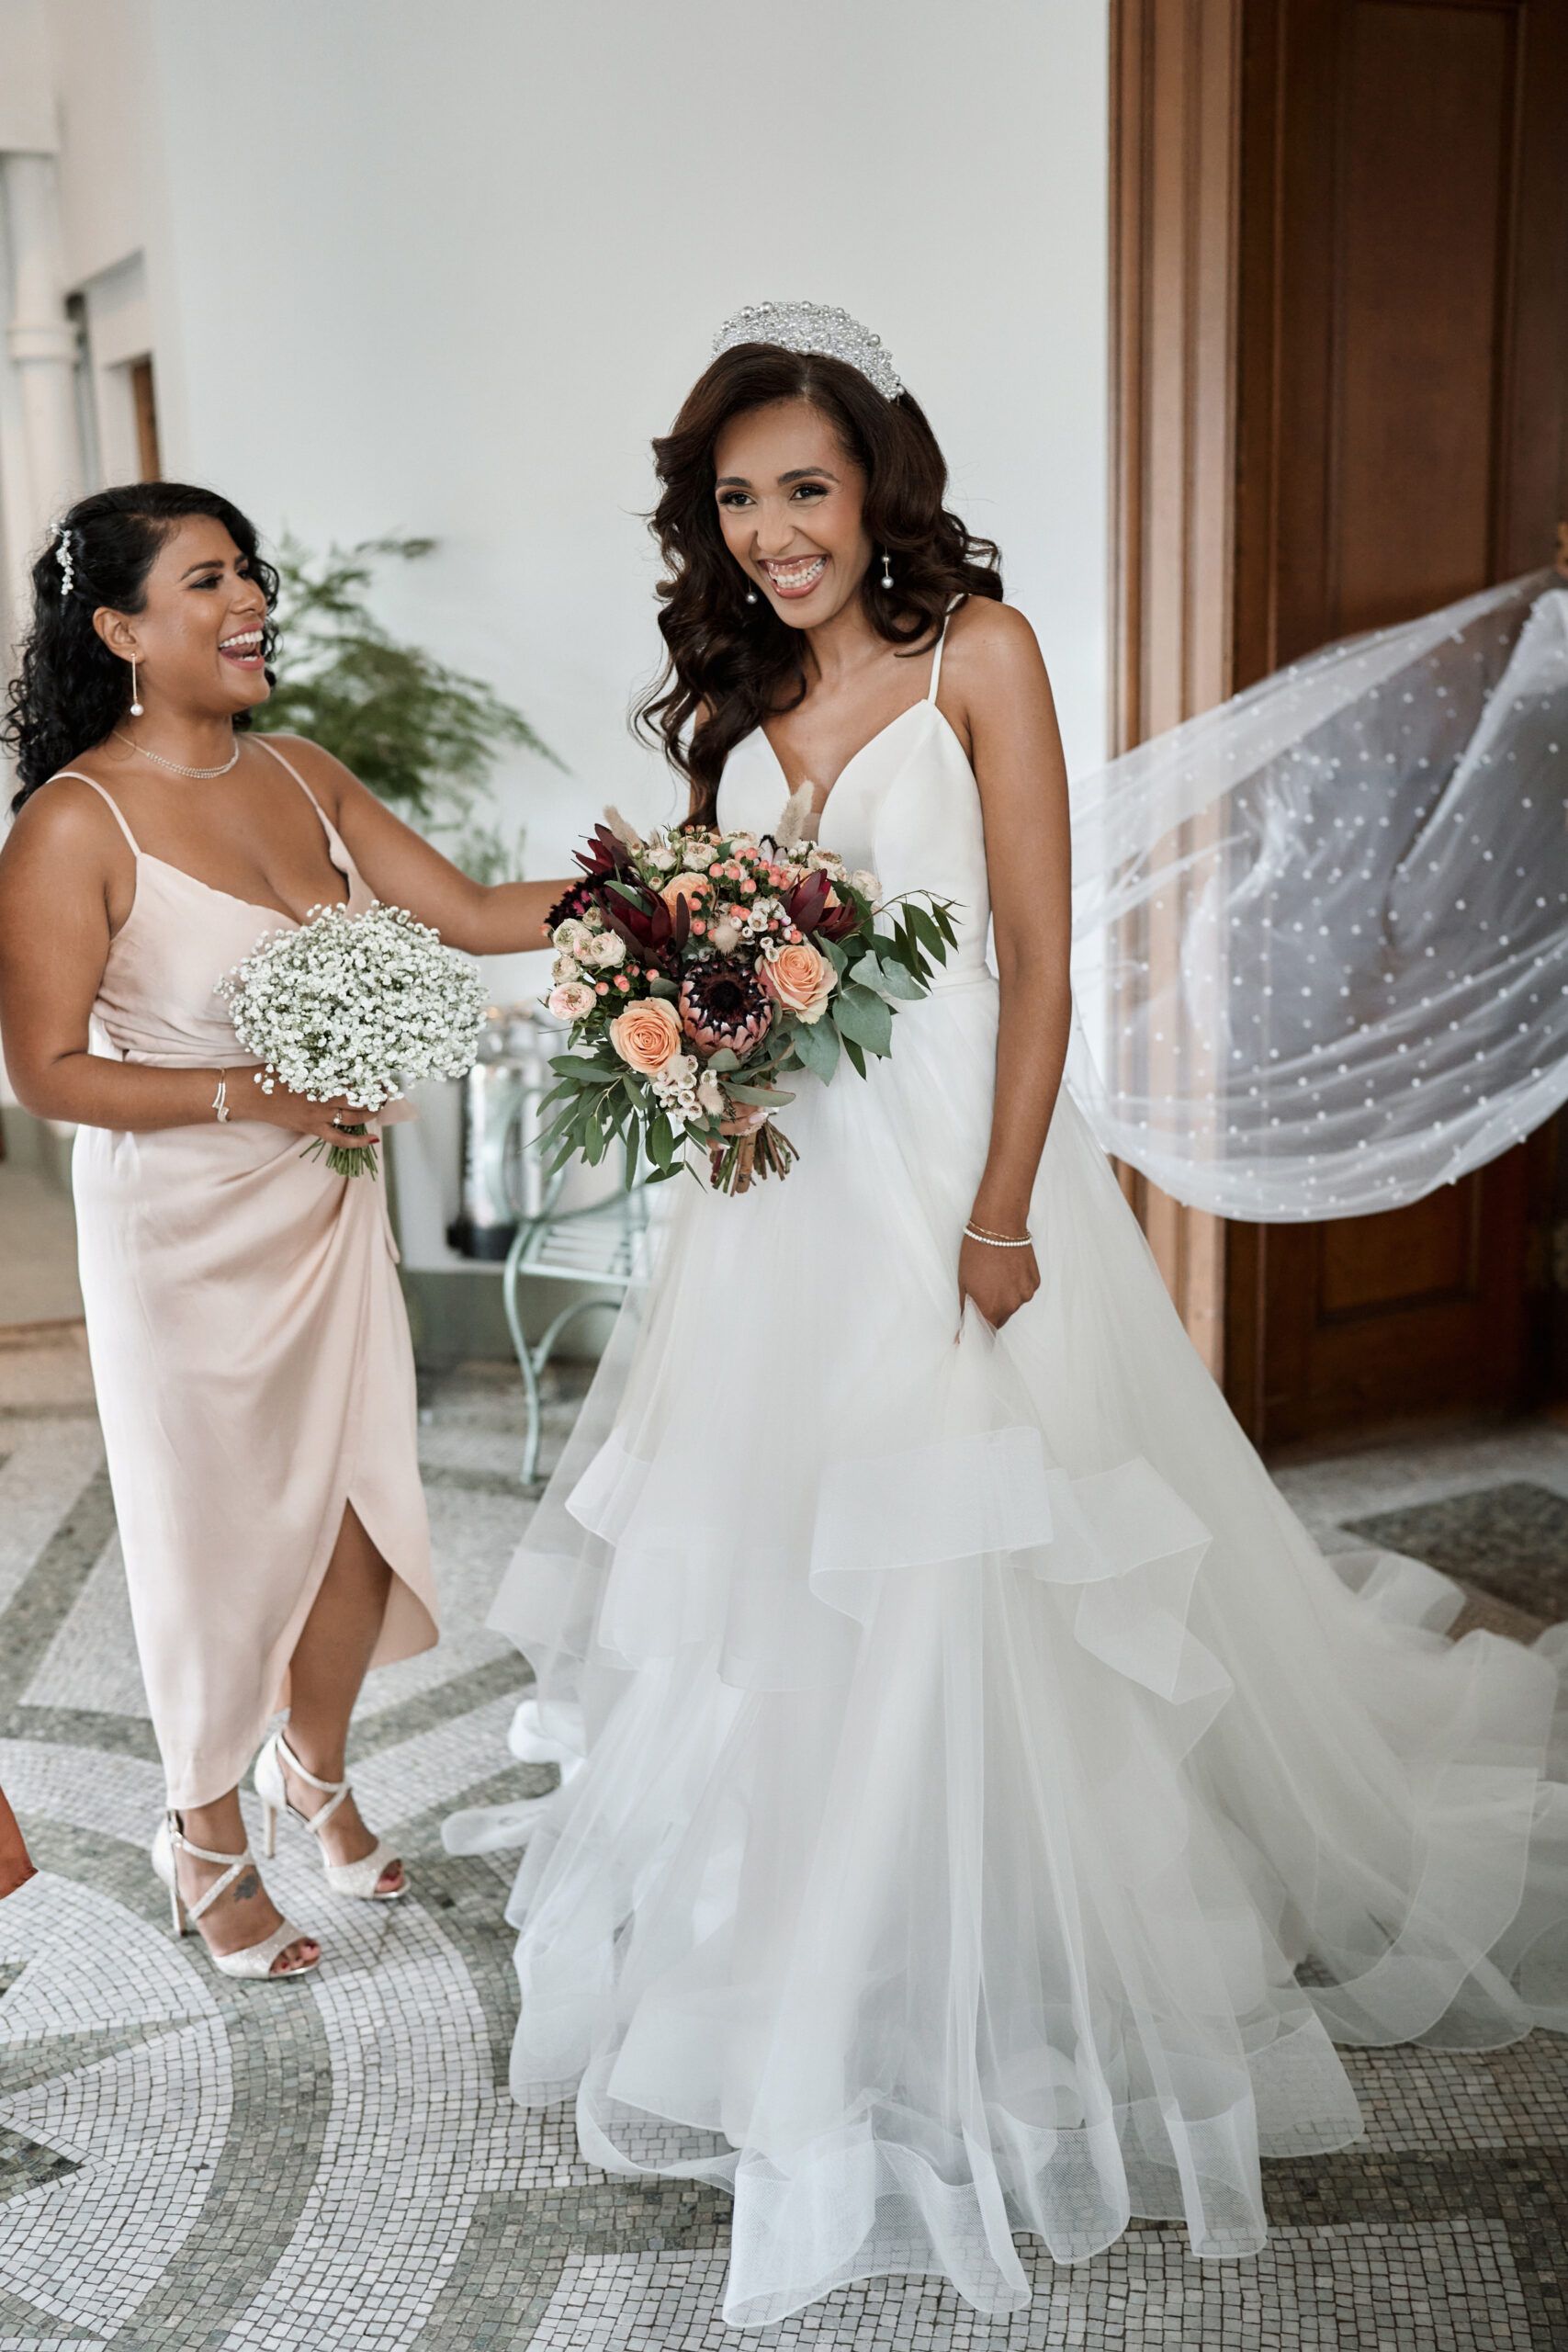 A bride and her mom are grinning at each other.